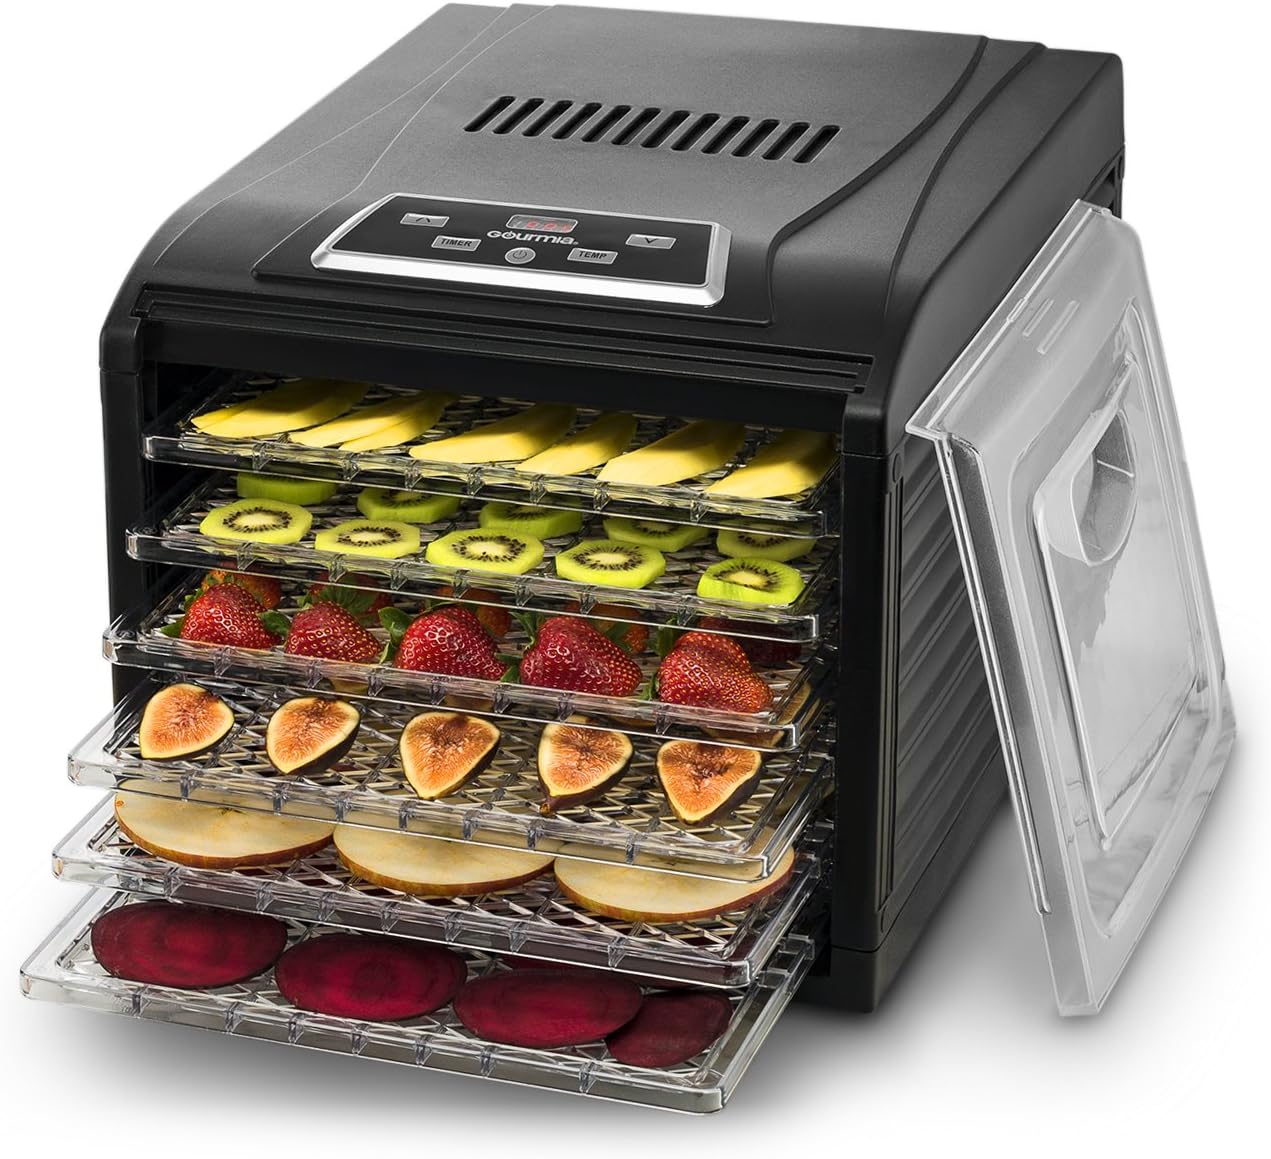 Save 28% when you pick up this highly-rated 6-tray food dehydrator for $115  Prime shipped